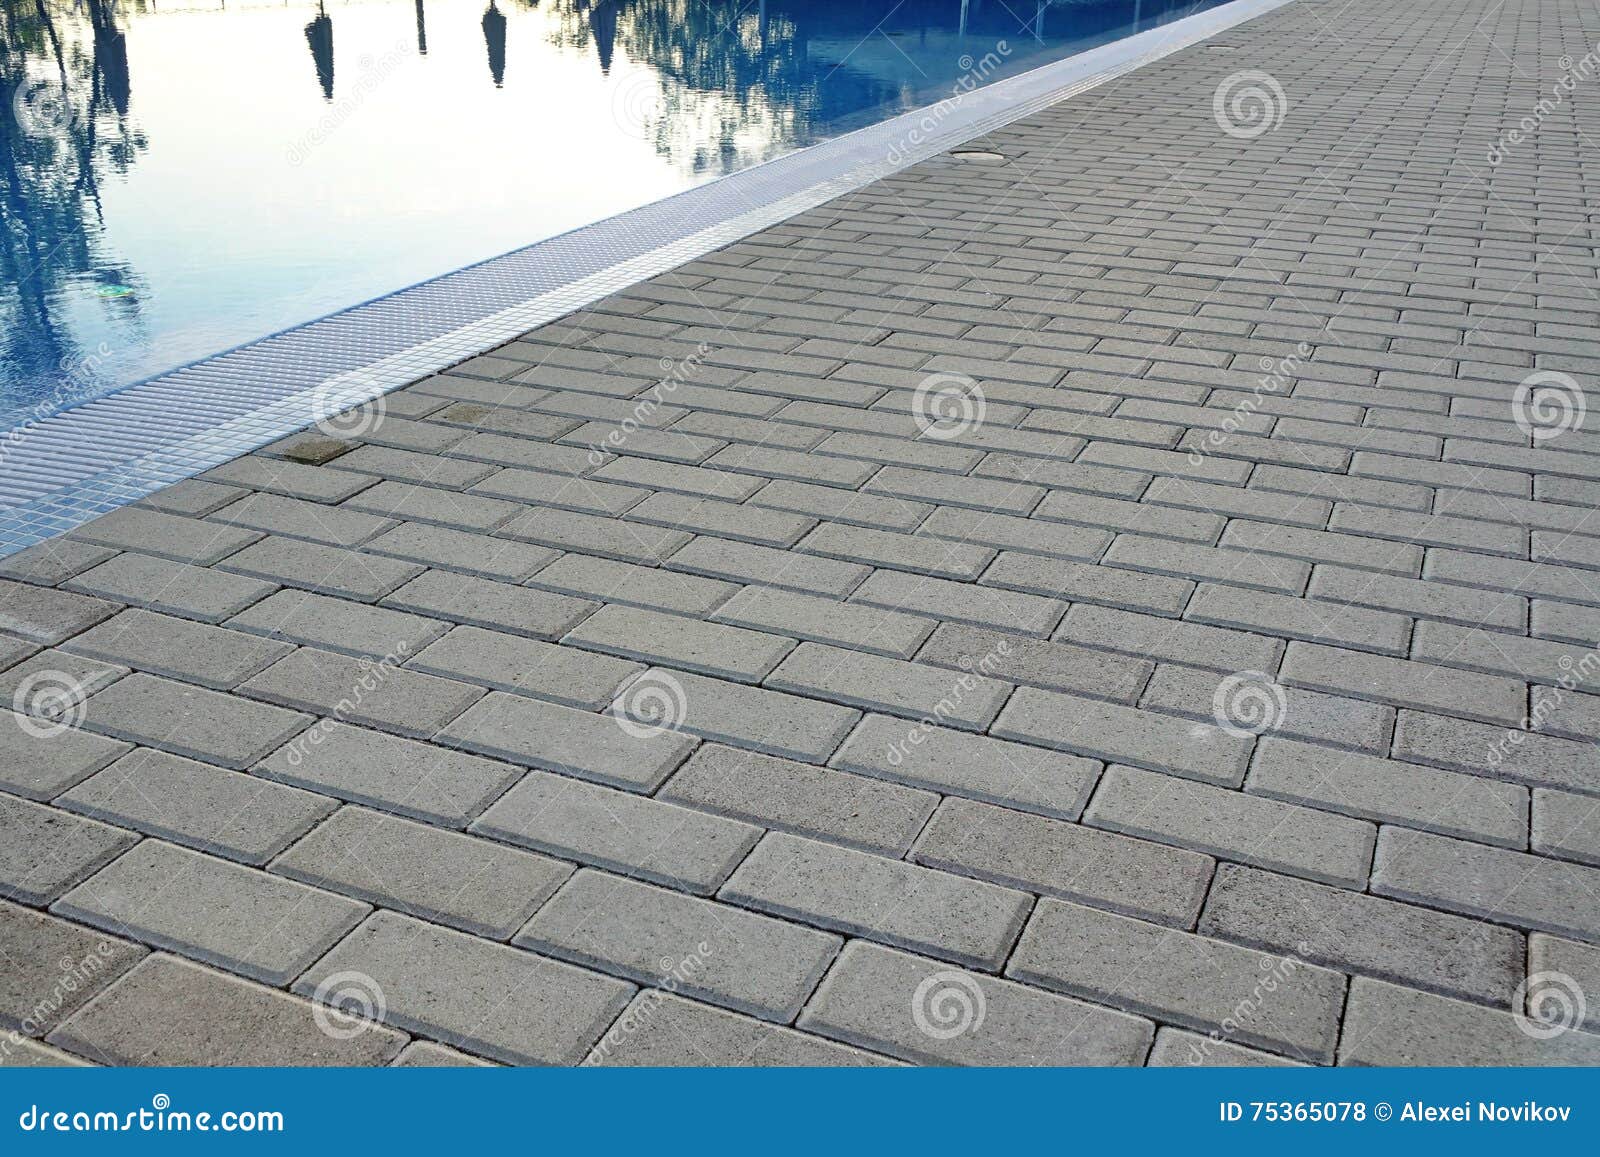 edge of swimming pool with reflection and concrete paving